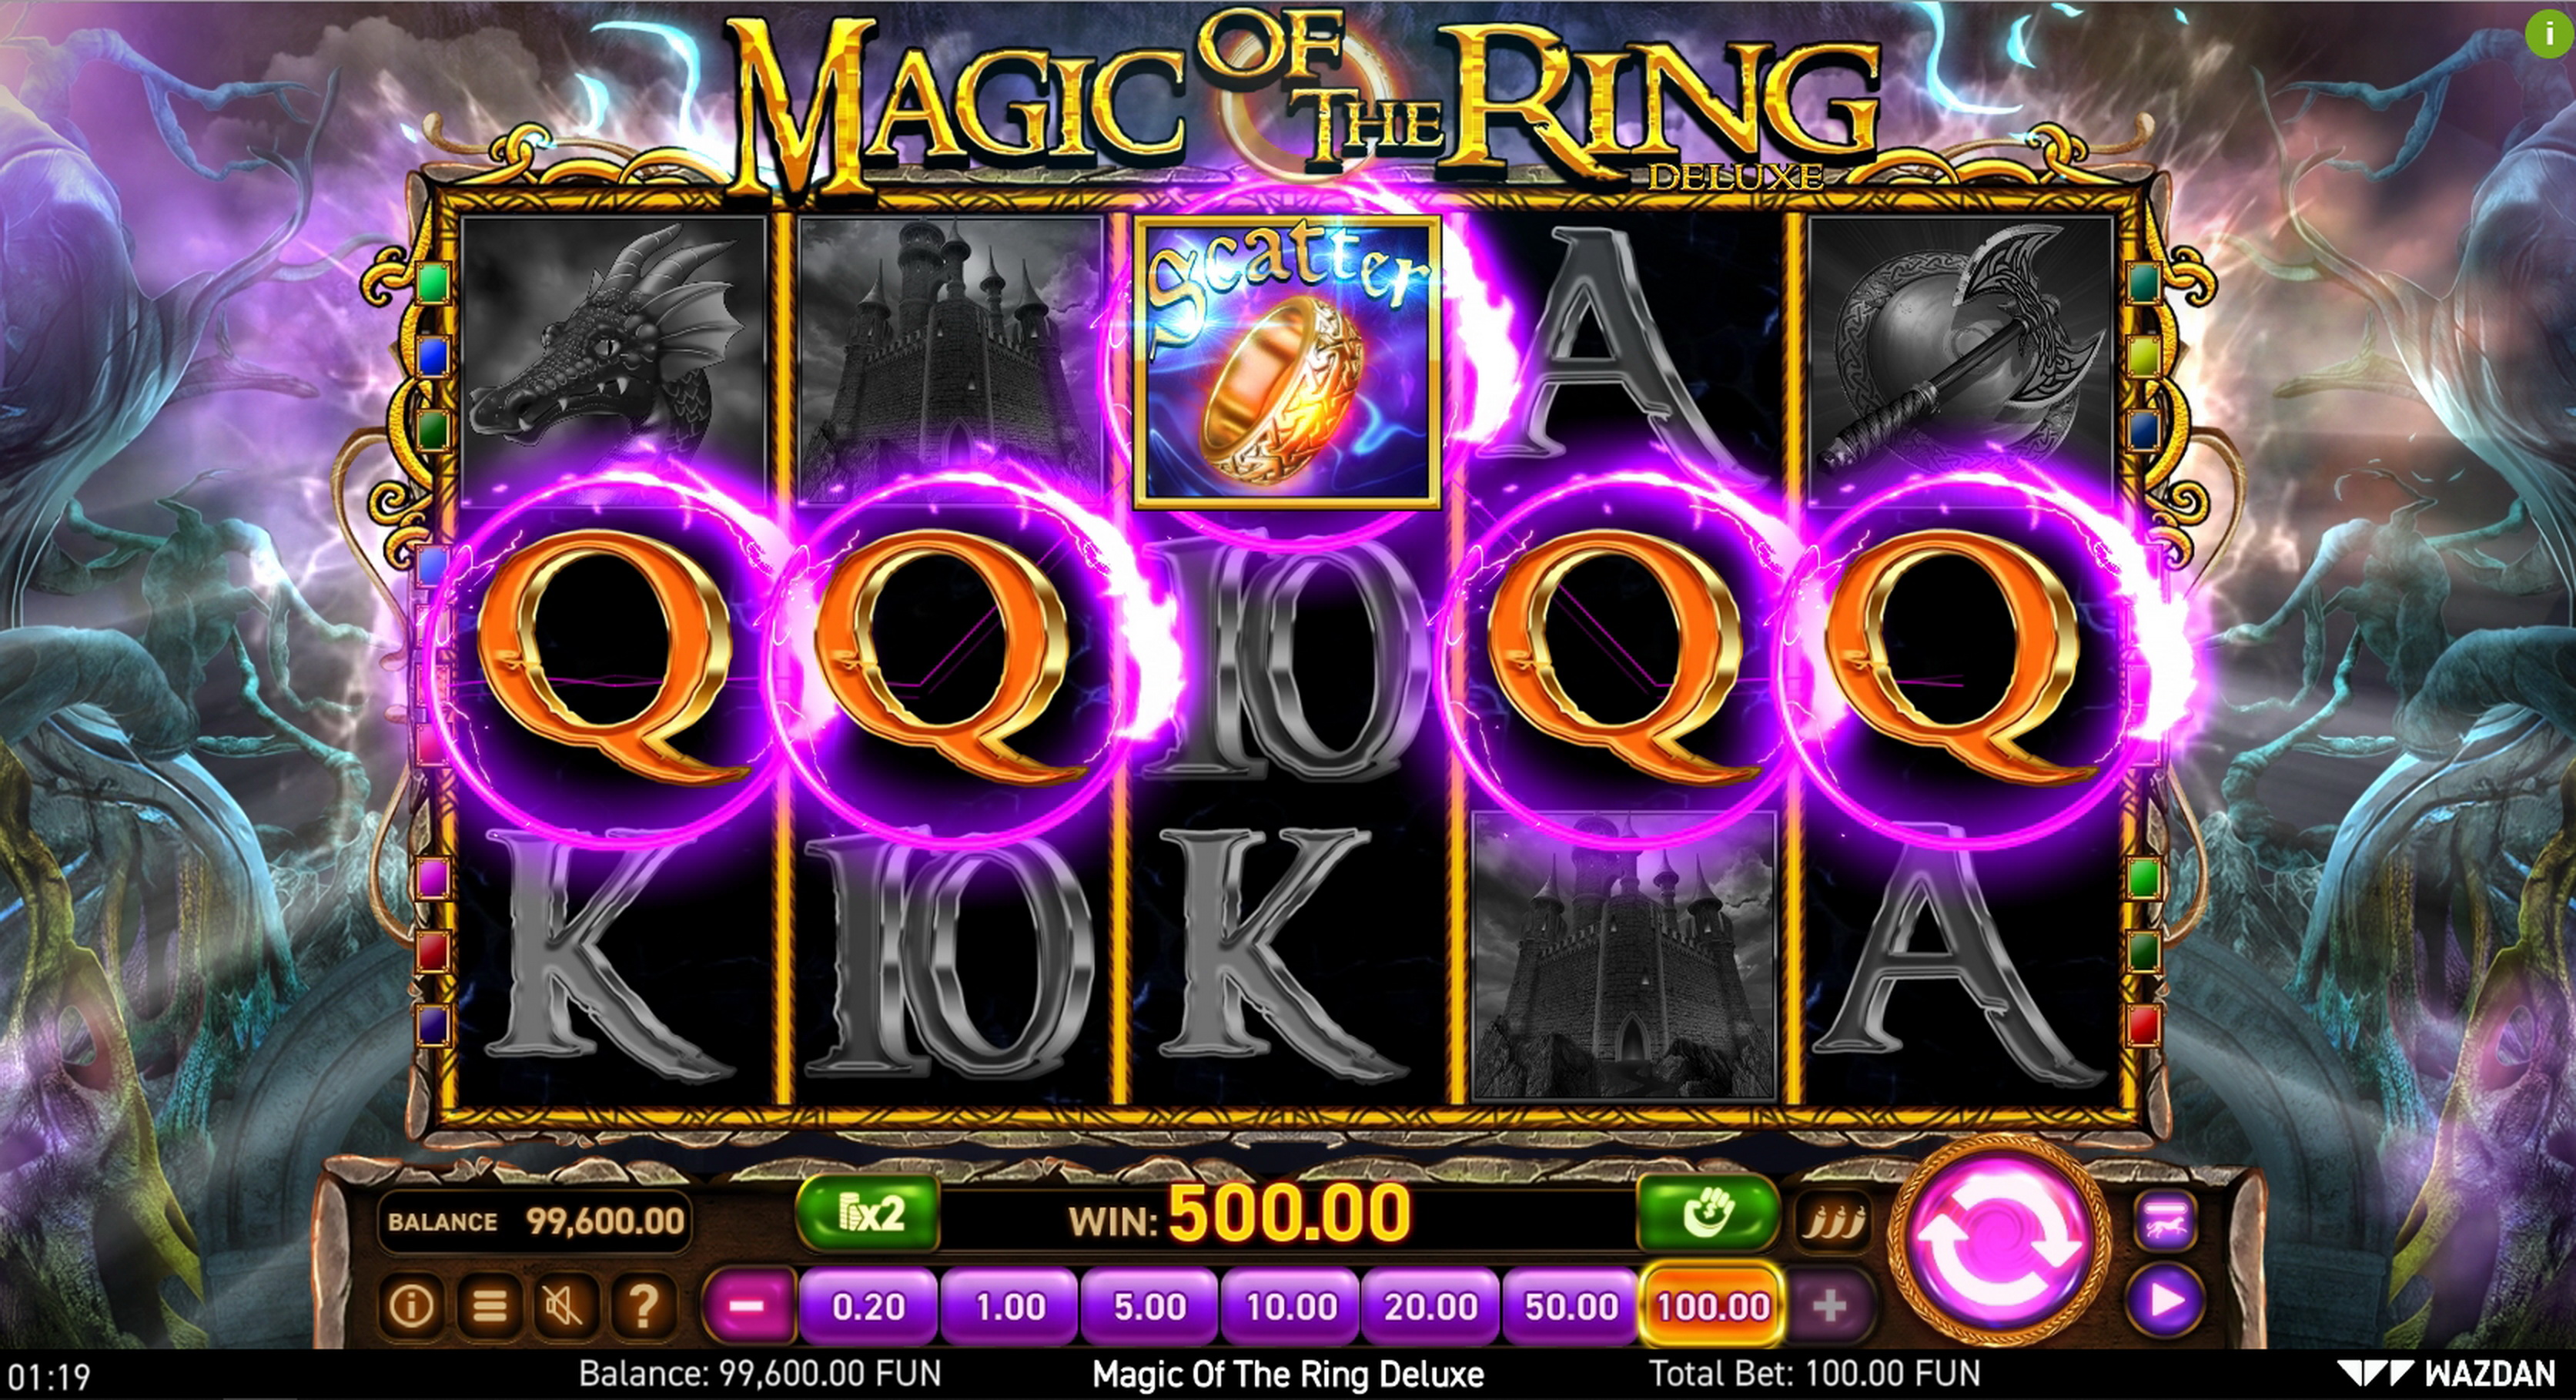 Win Money in Magic of the Ring Deluxe Free Slot Game by Wazdan